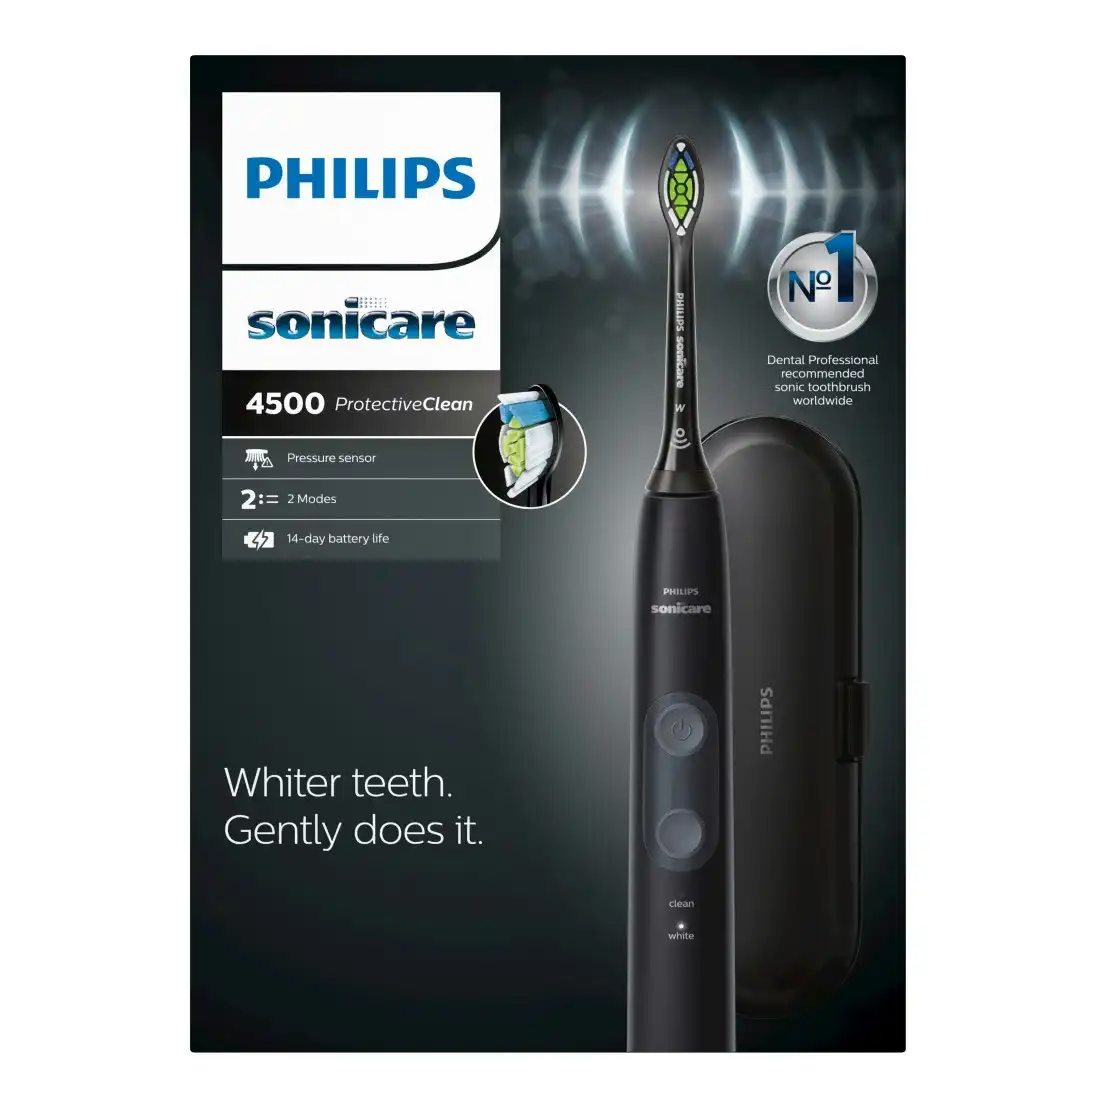 Philips Sonicare ProtectiveClean 4500 Whitening Electric Toothbrush - Black